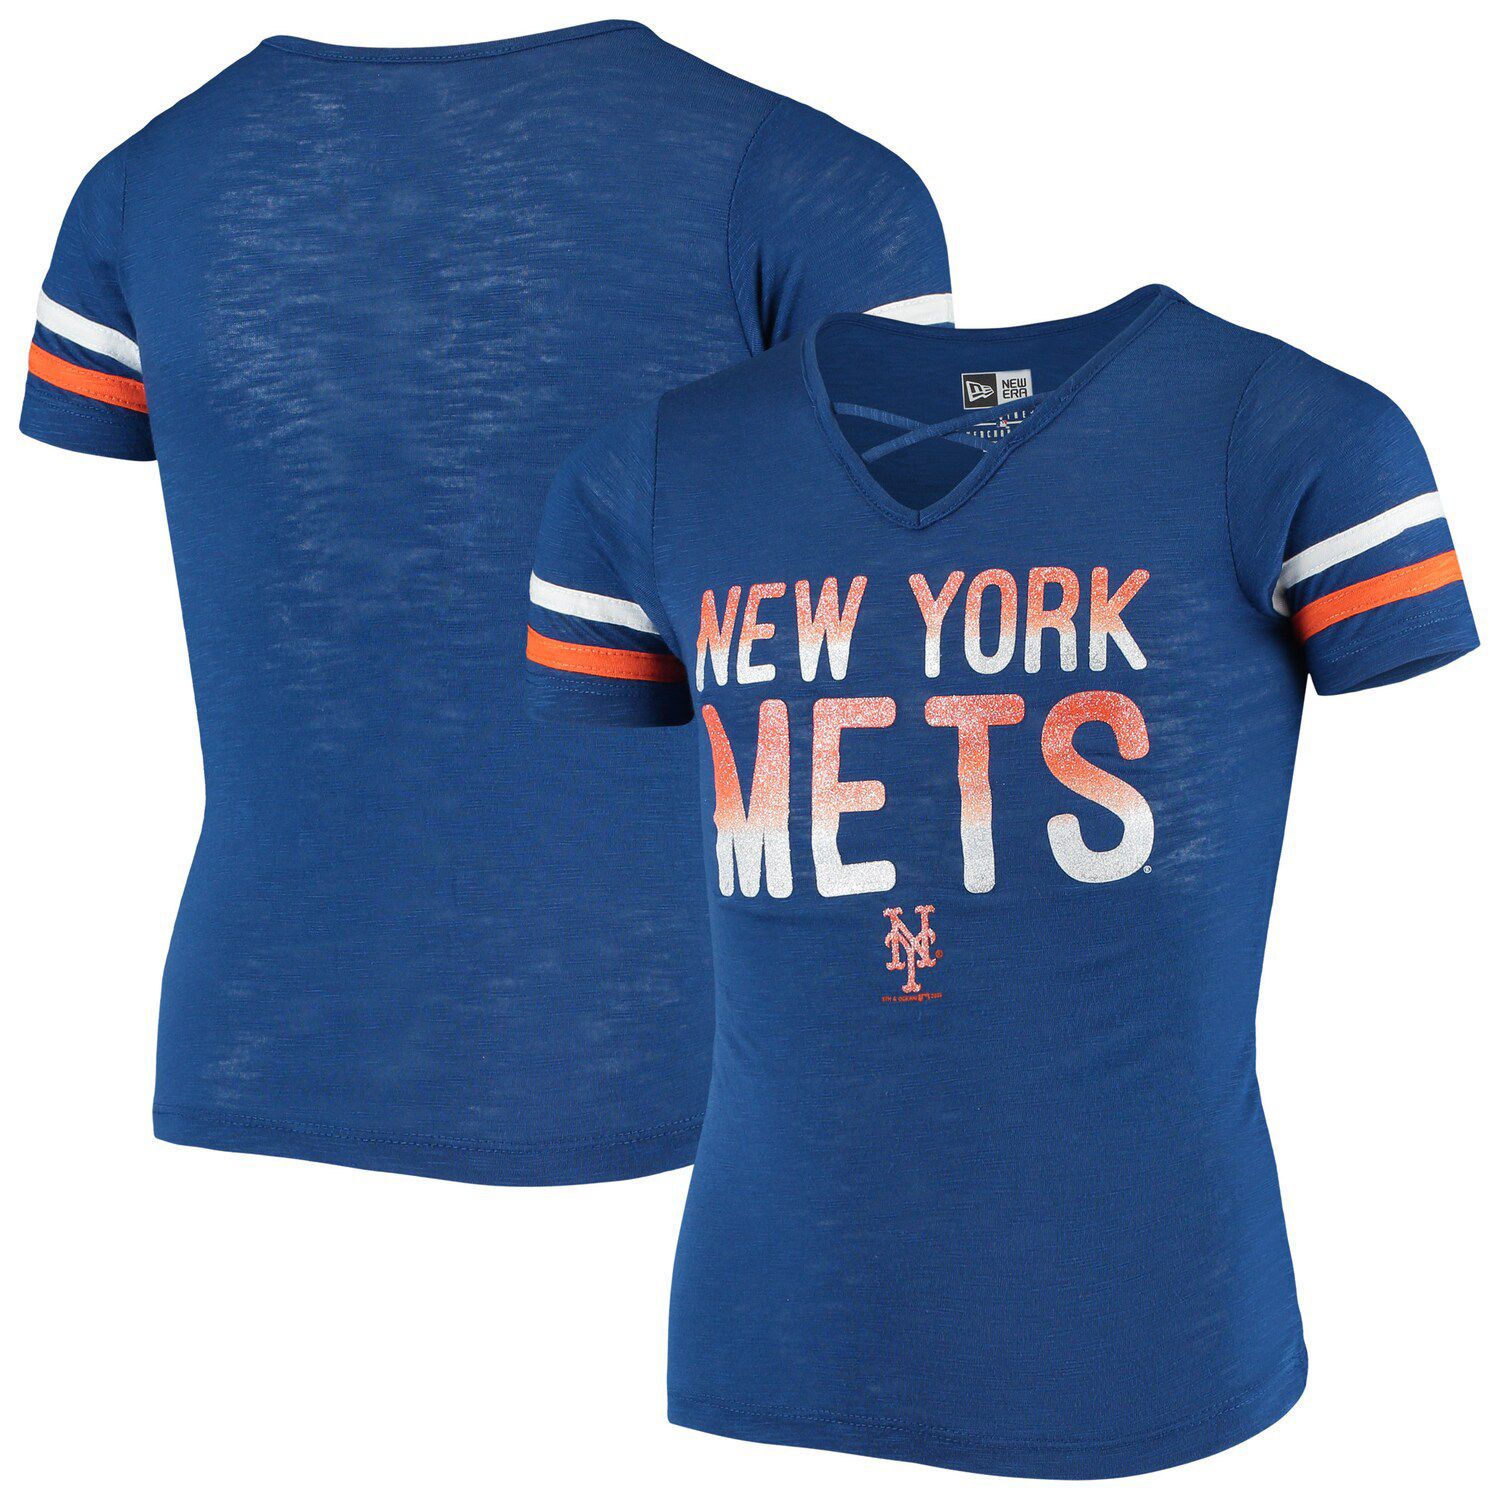 mets shirts for girls